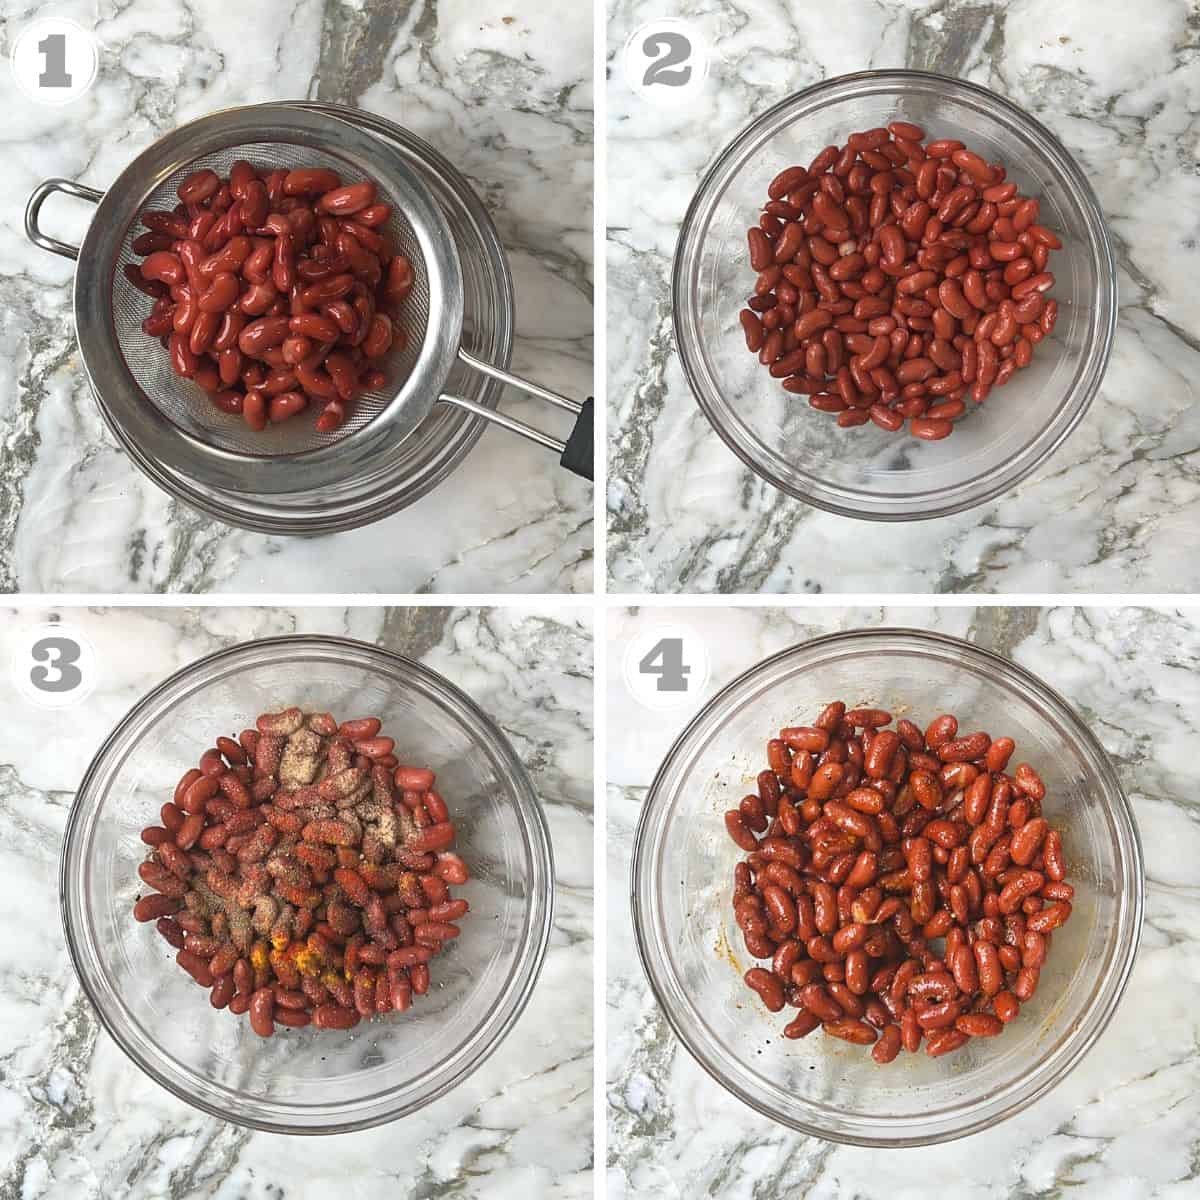 photos one through four showing how to prepare kidney beans for roasting 